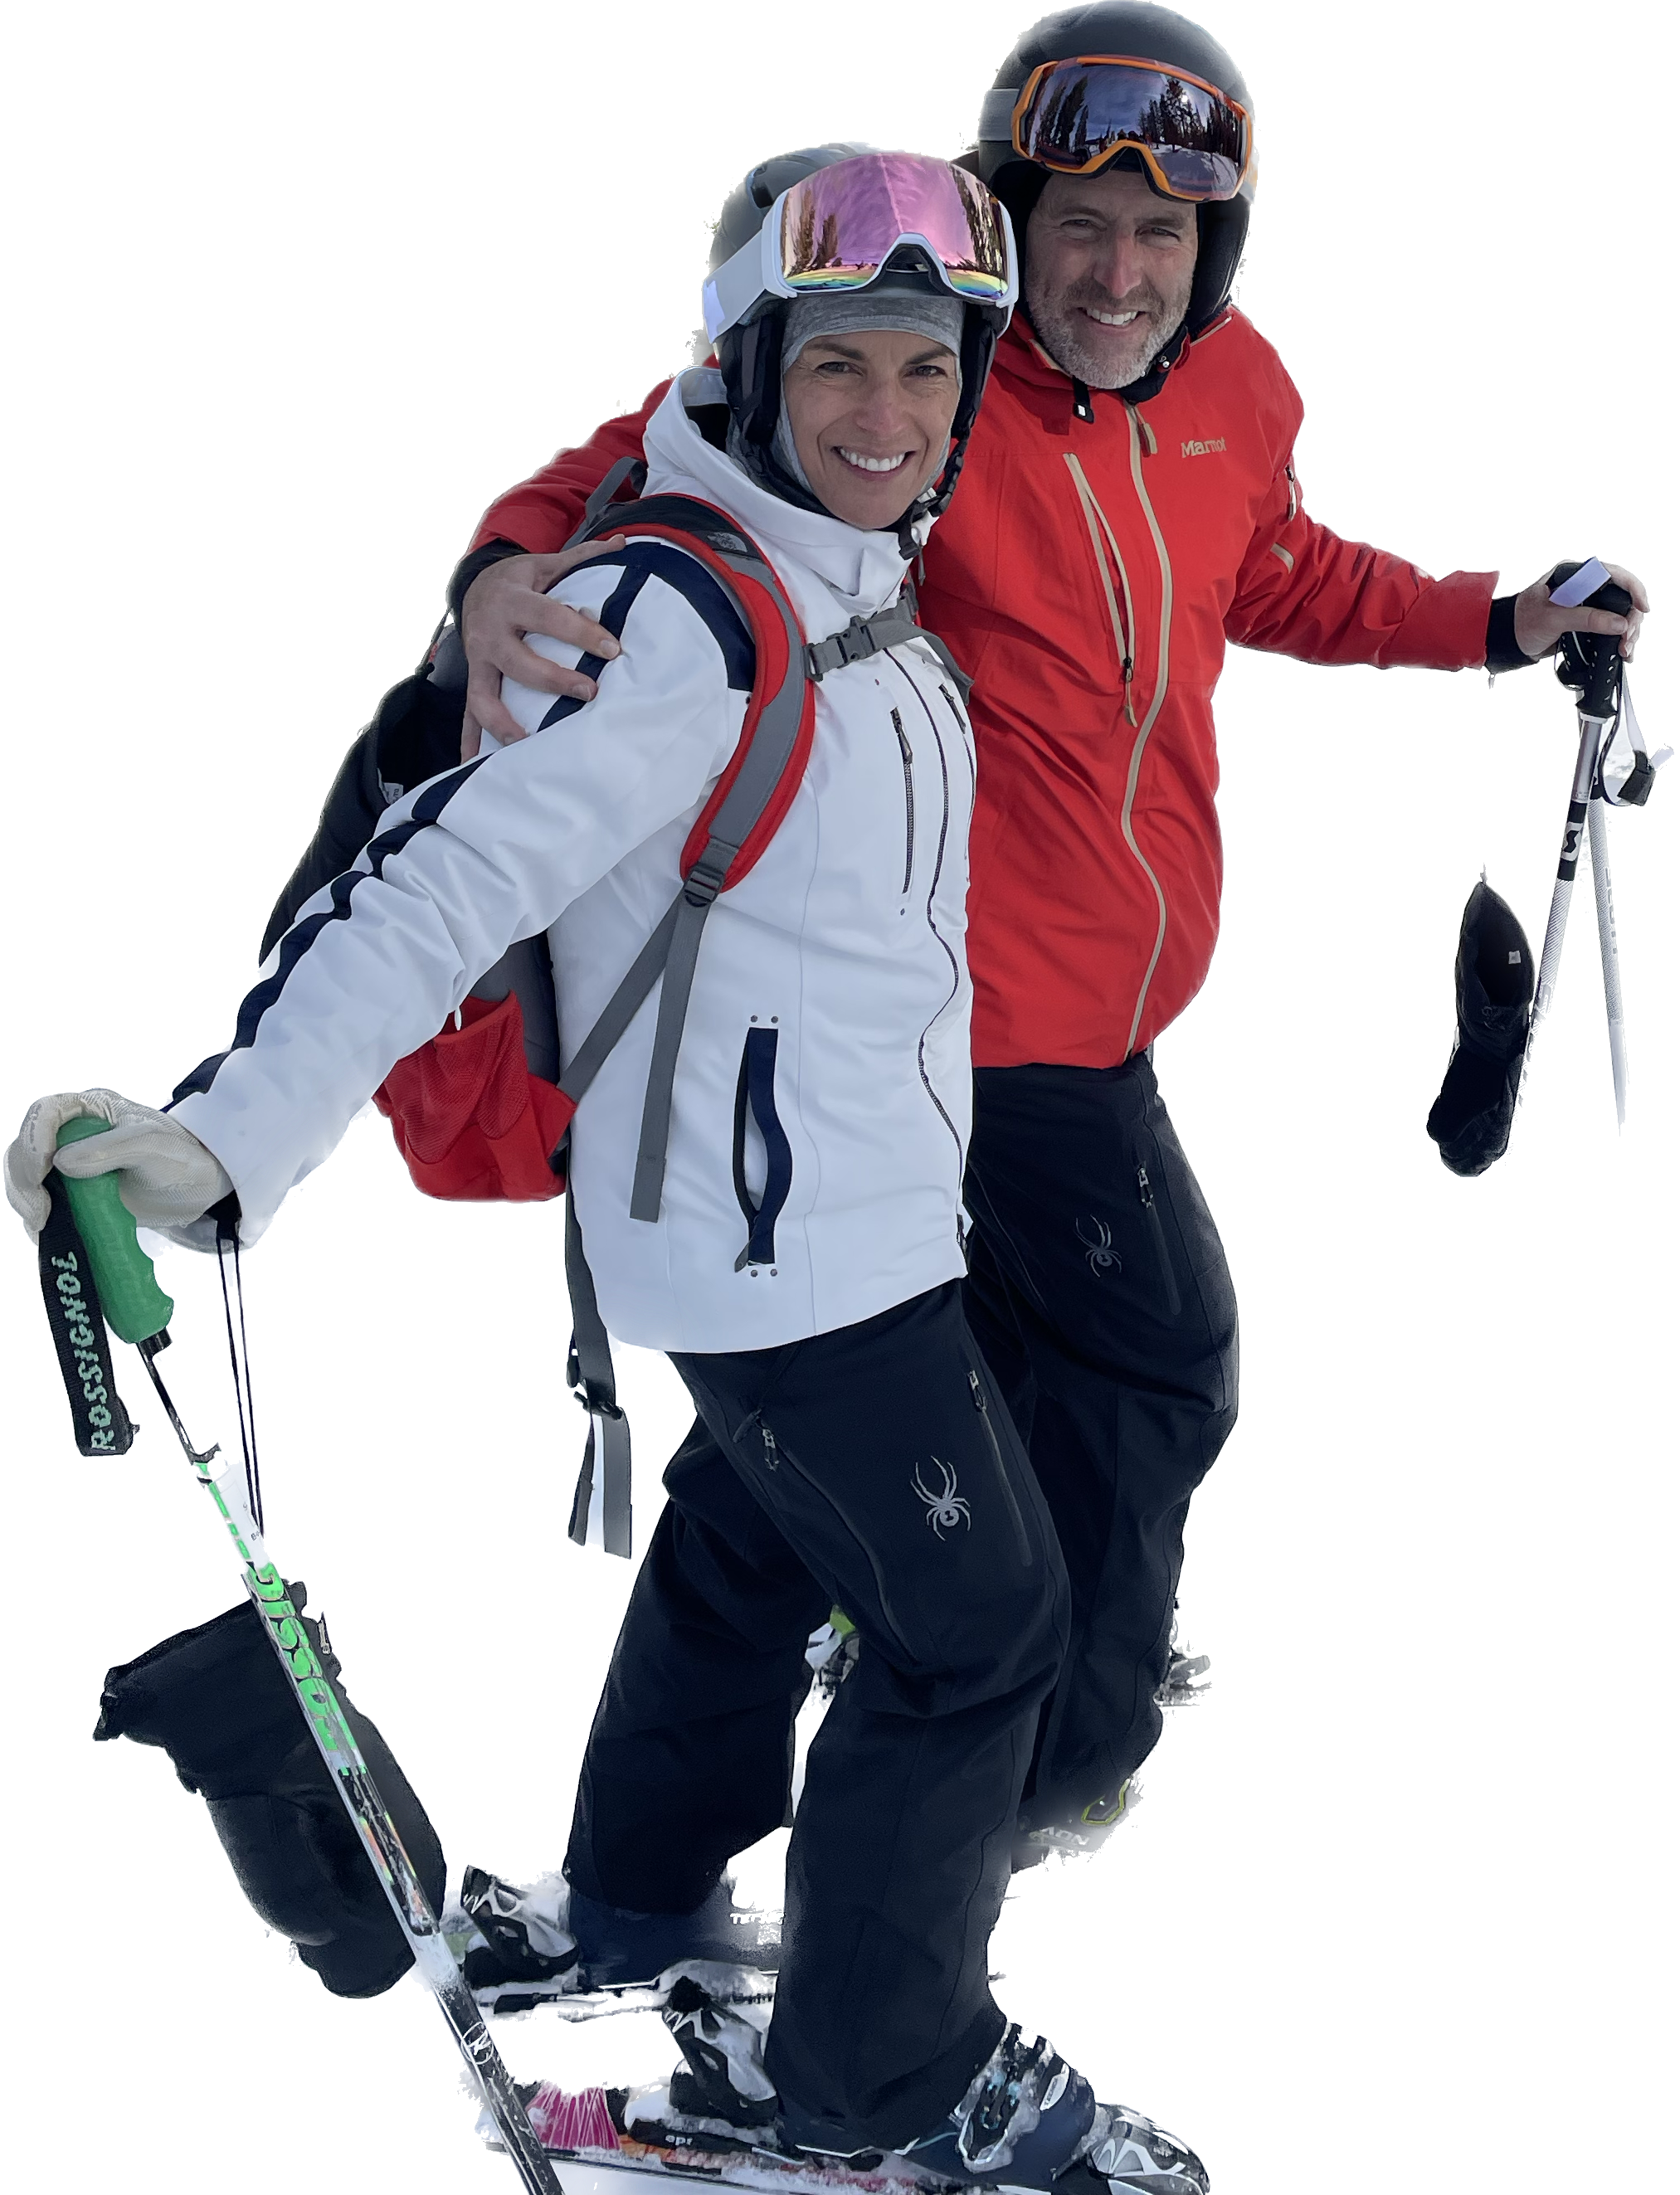 Ron skiing with his wife after his second hip surgery (four months from the surgery!).